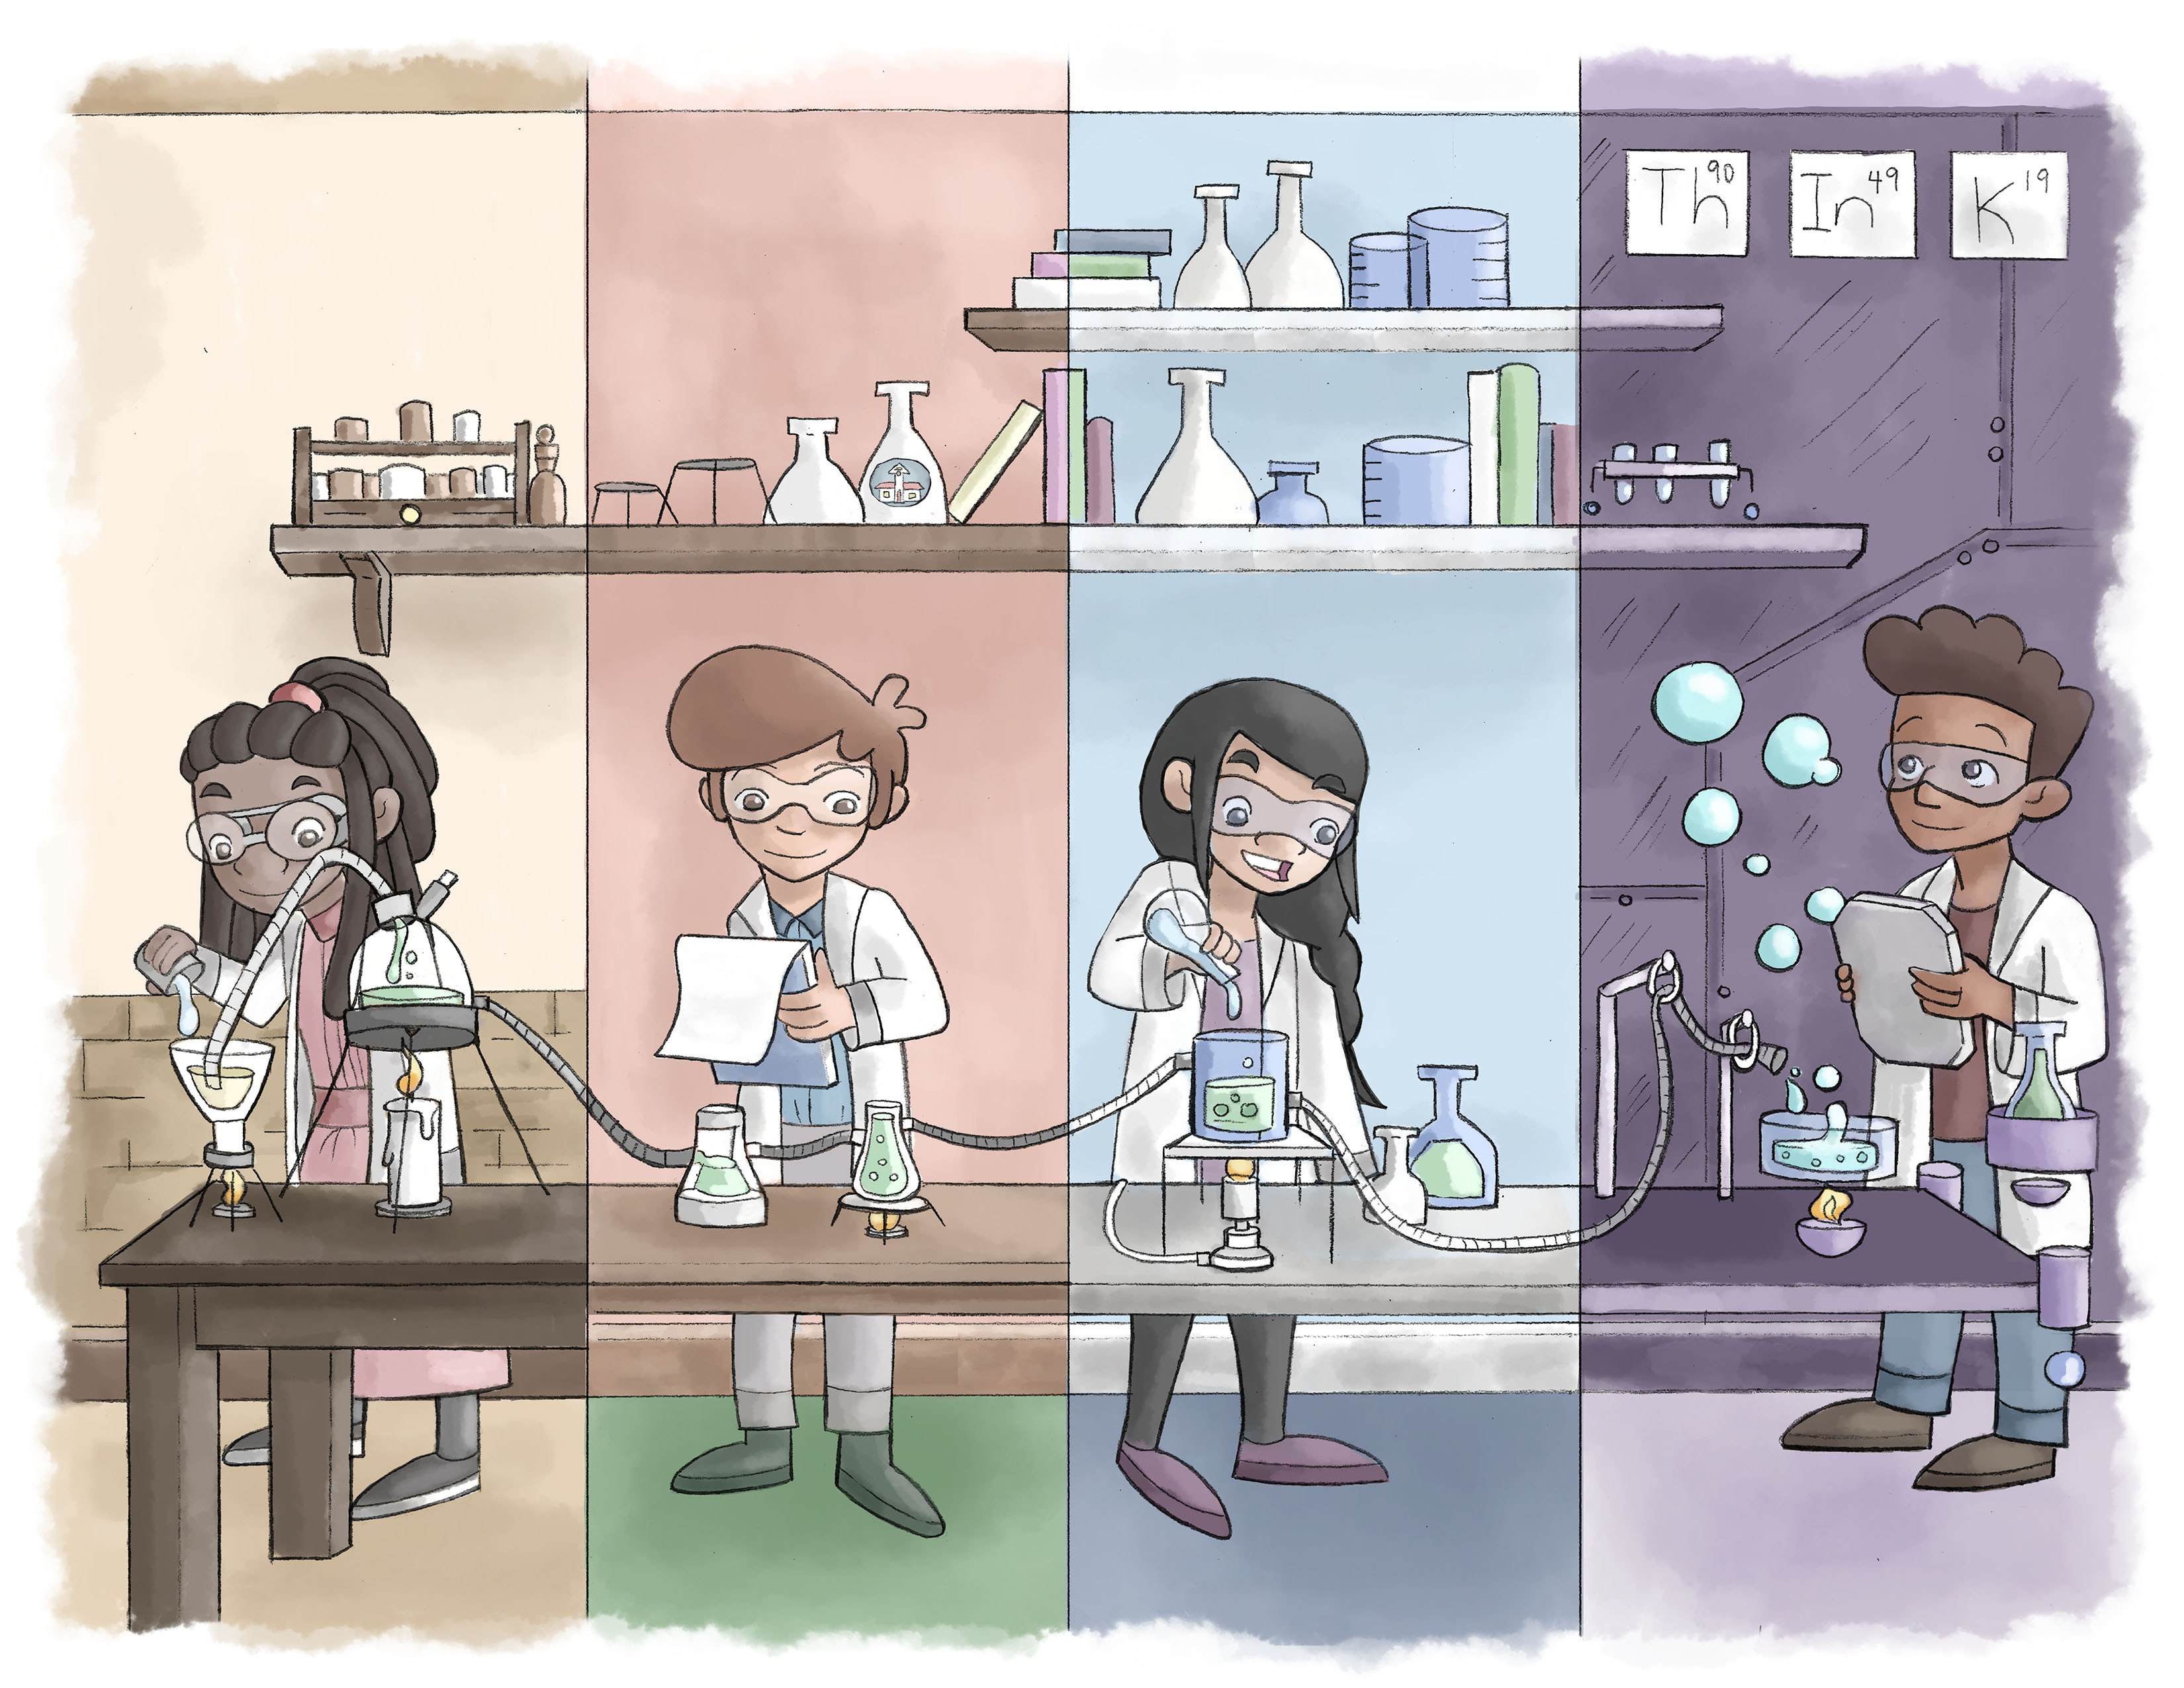 The research, cartoon of multicultural kids playing with science